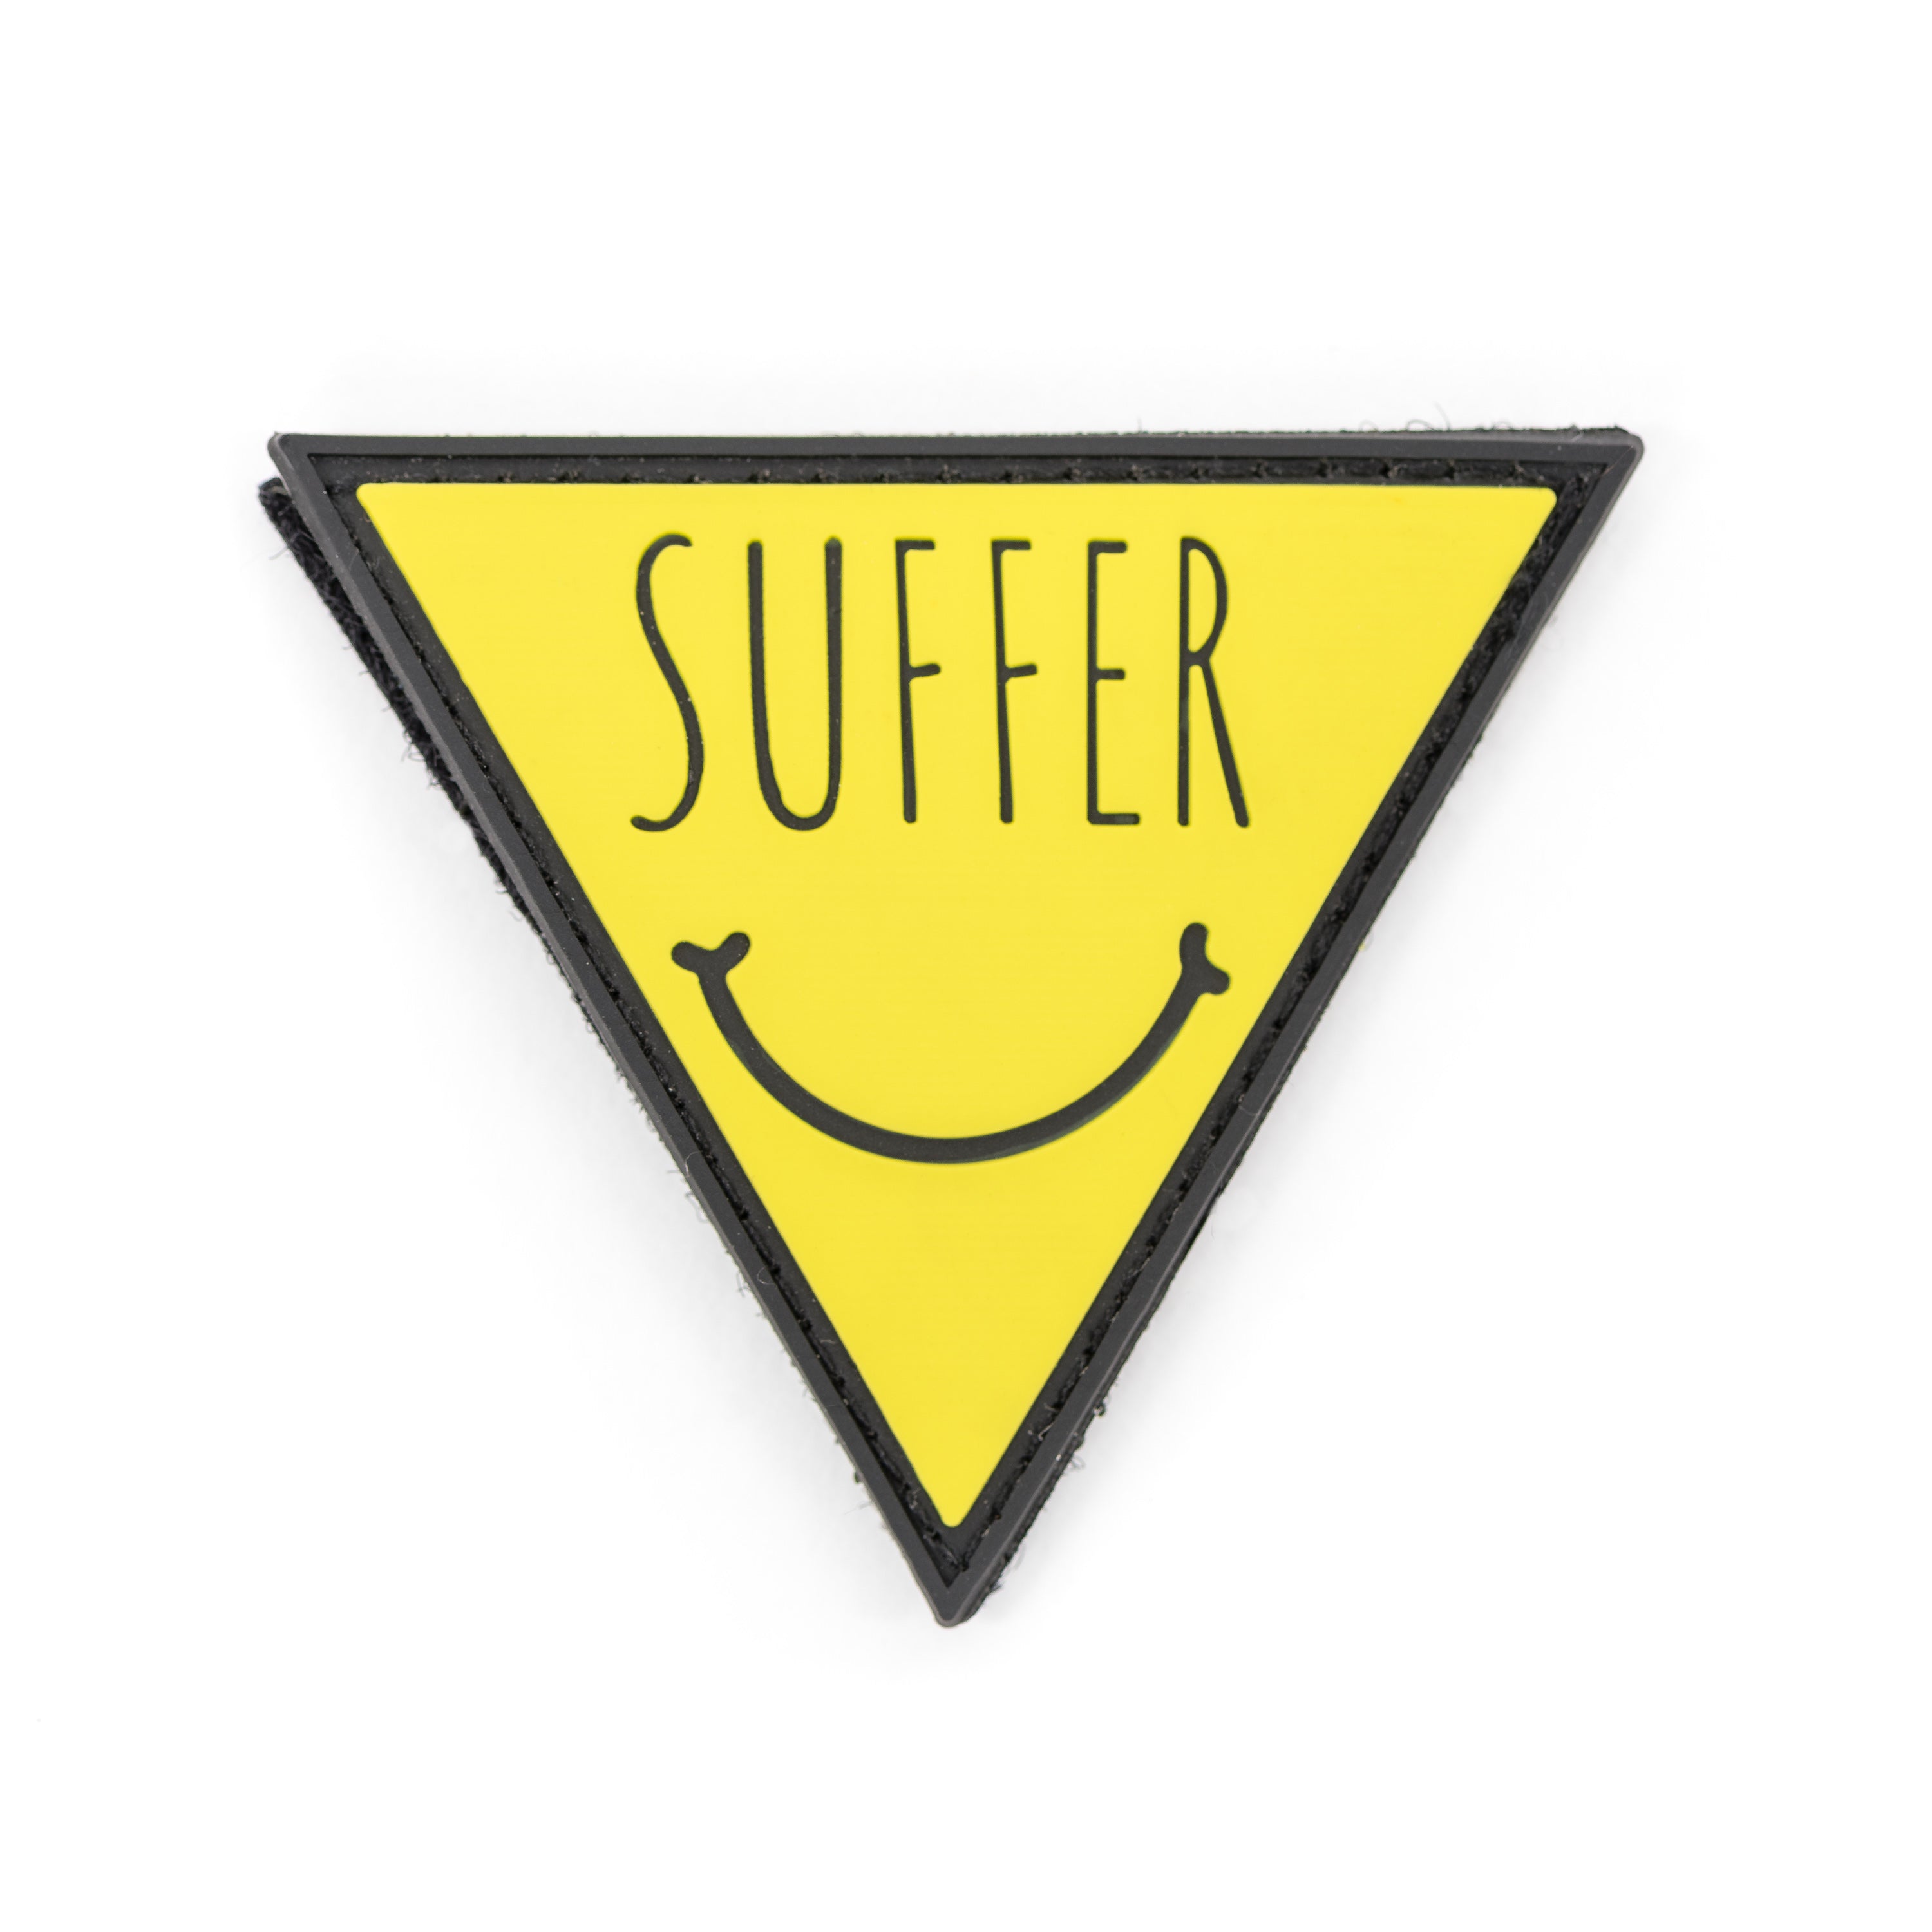 Suffer Patch